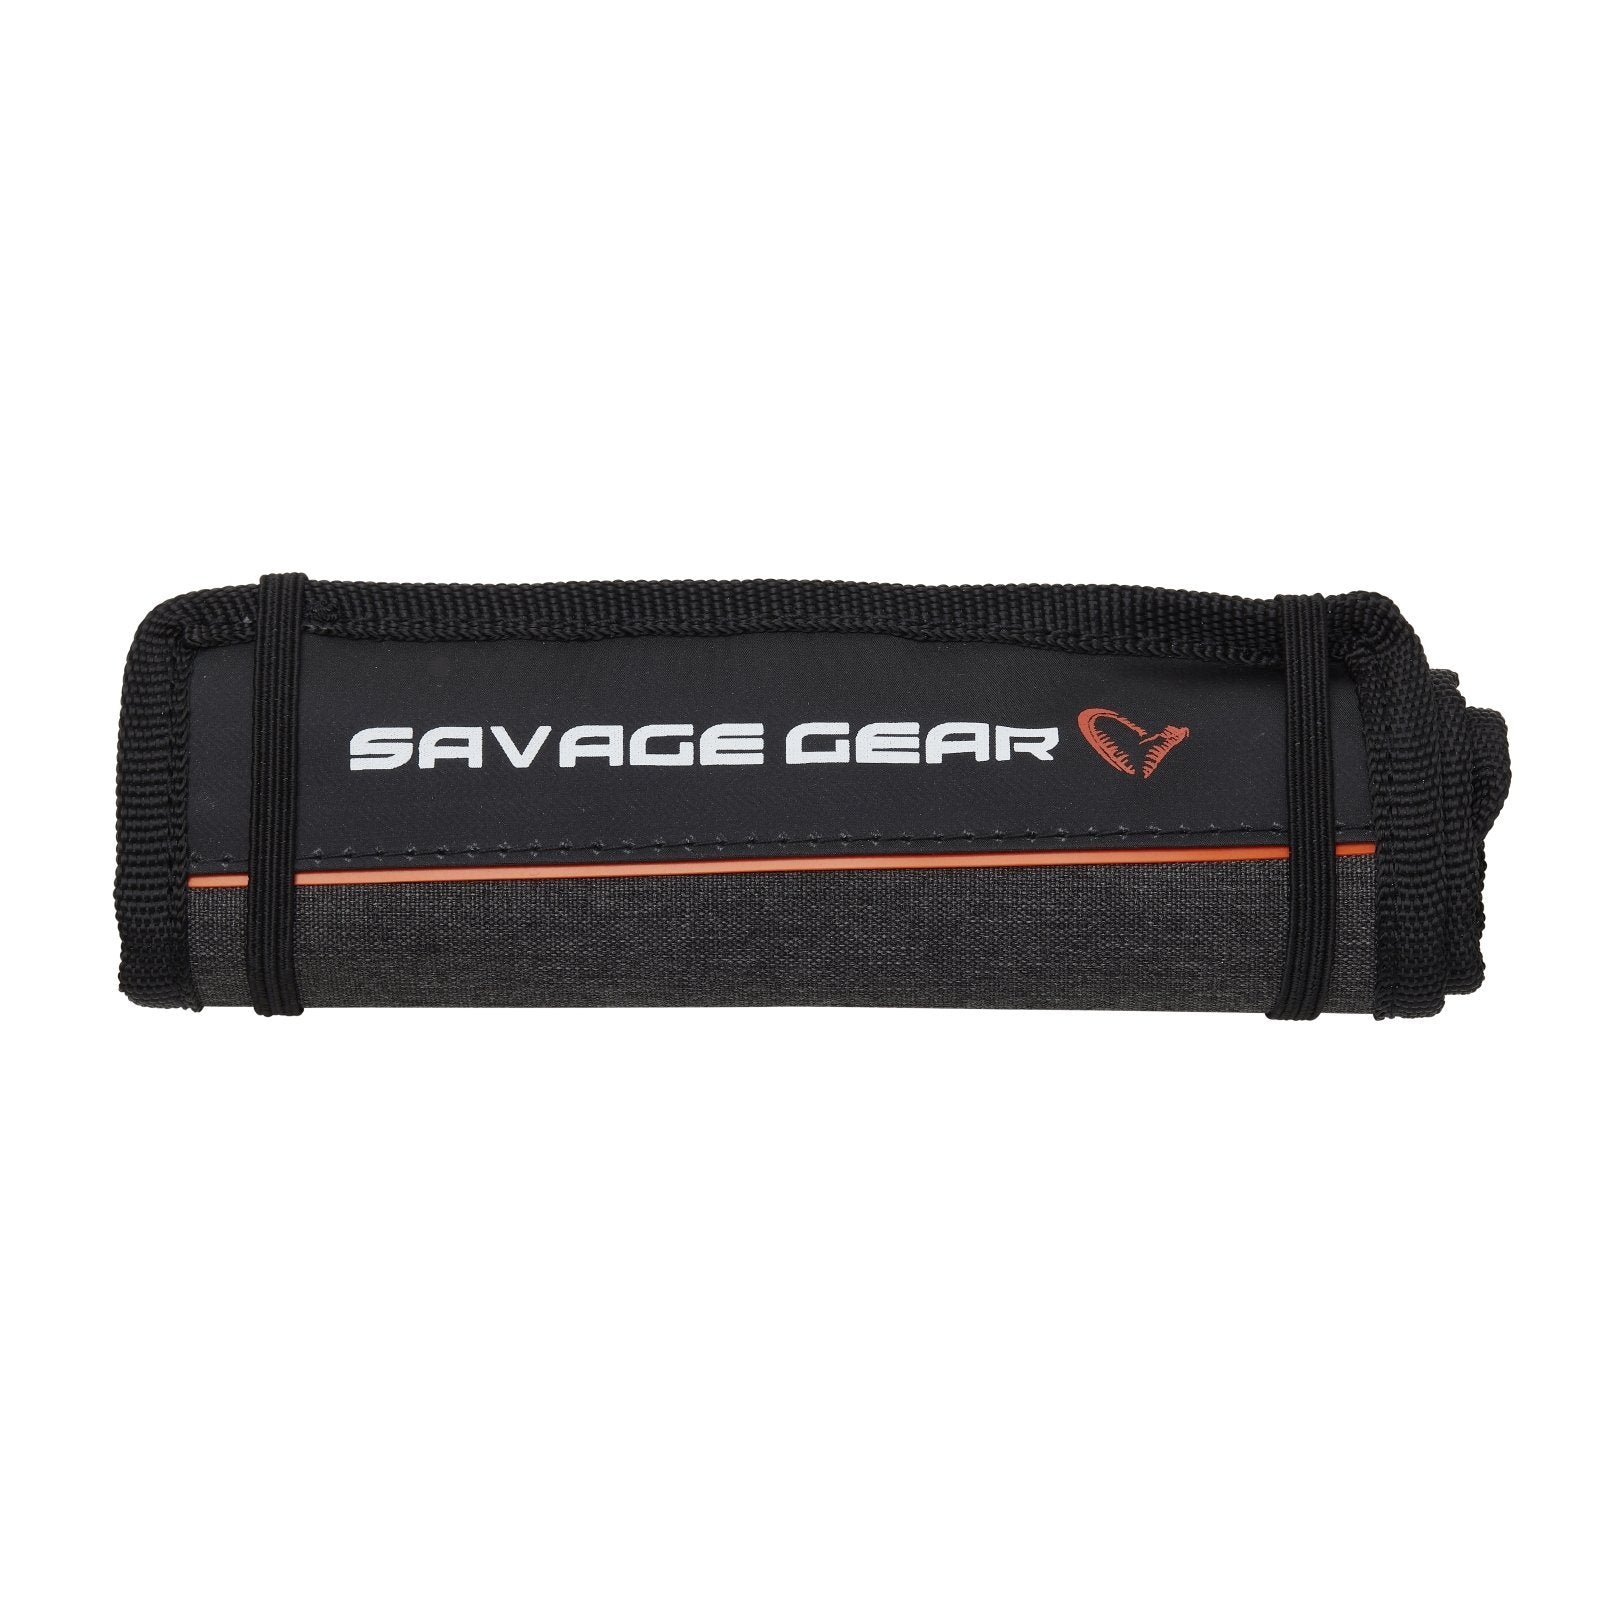 Savage Gear Roll Up Pouch 1